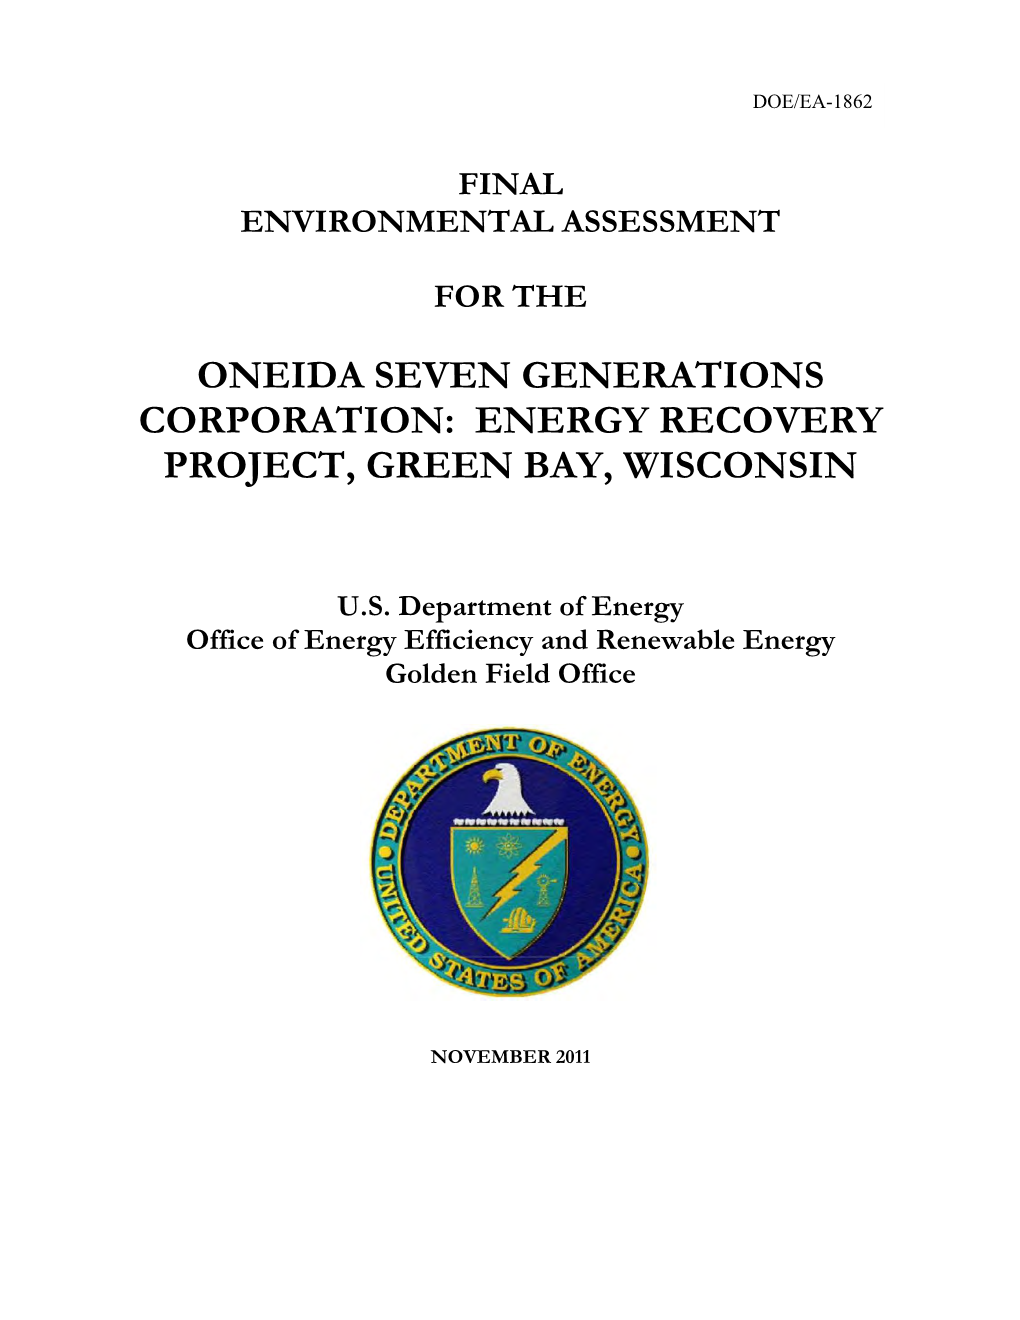 Oneida Seven Generations Corporation: Energy Recovery Project, Green Bay, Wisconsin